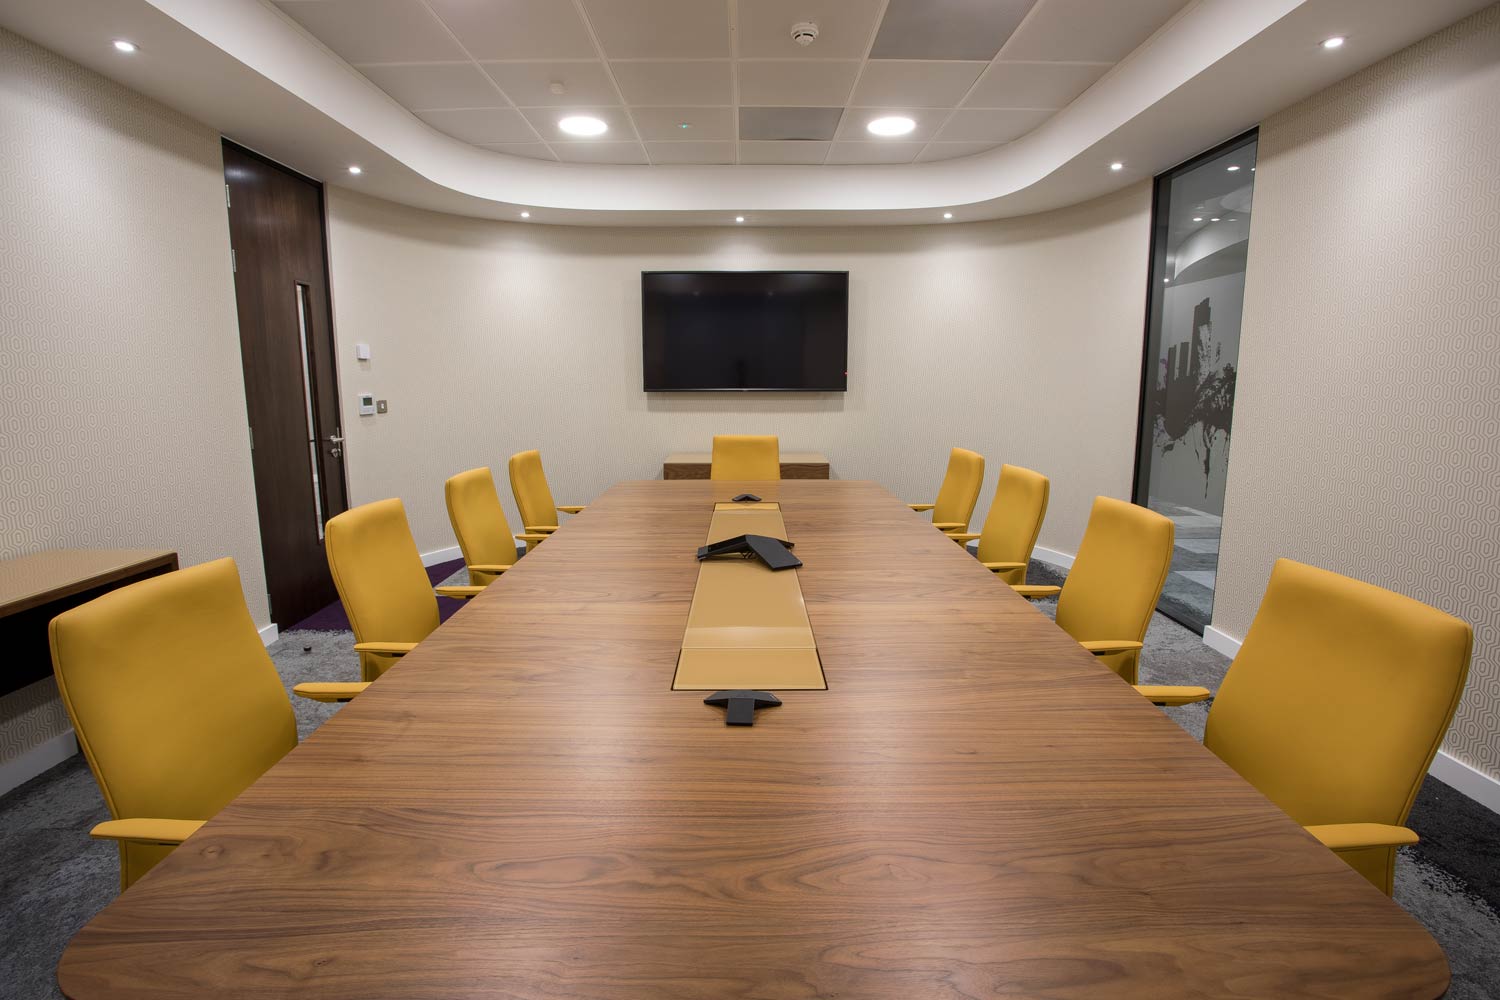 Willis Towers Watson Boardroom with integrated LG display, Barco clickshare, and Crestron control.